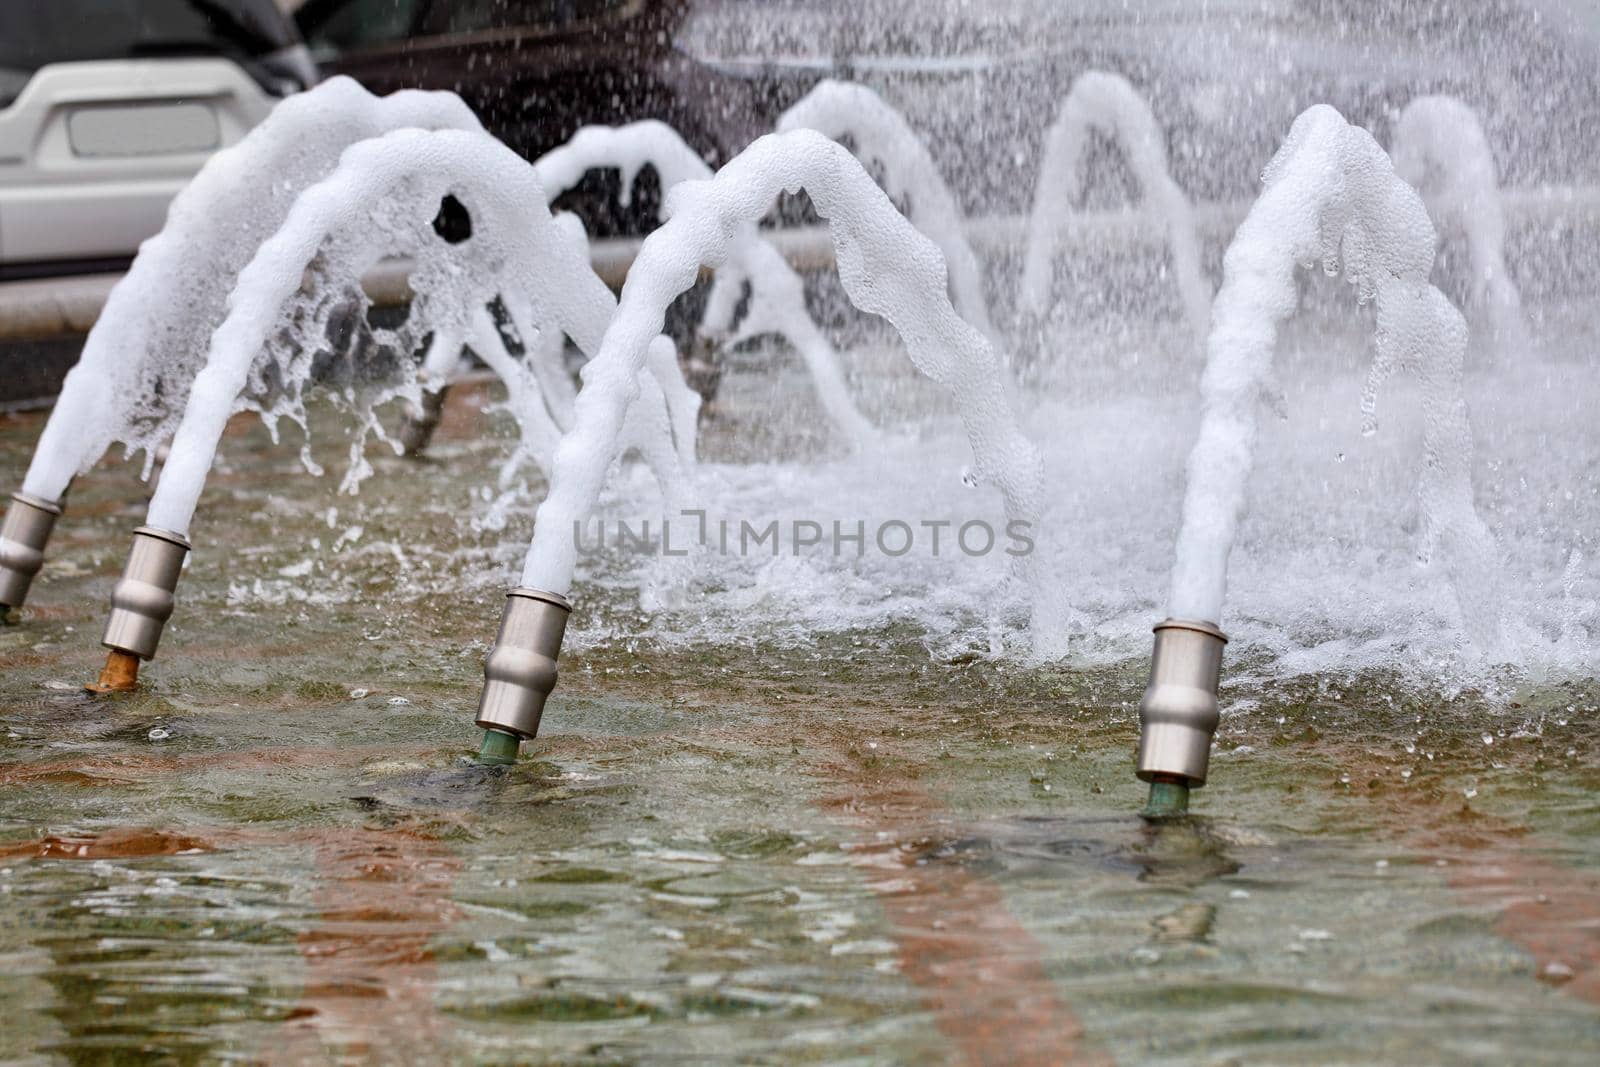 The foamed water jets of the city fountain create an extravaganza of splashes with a beautiful dance.